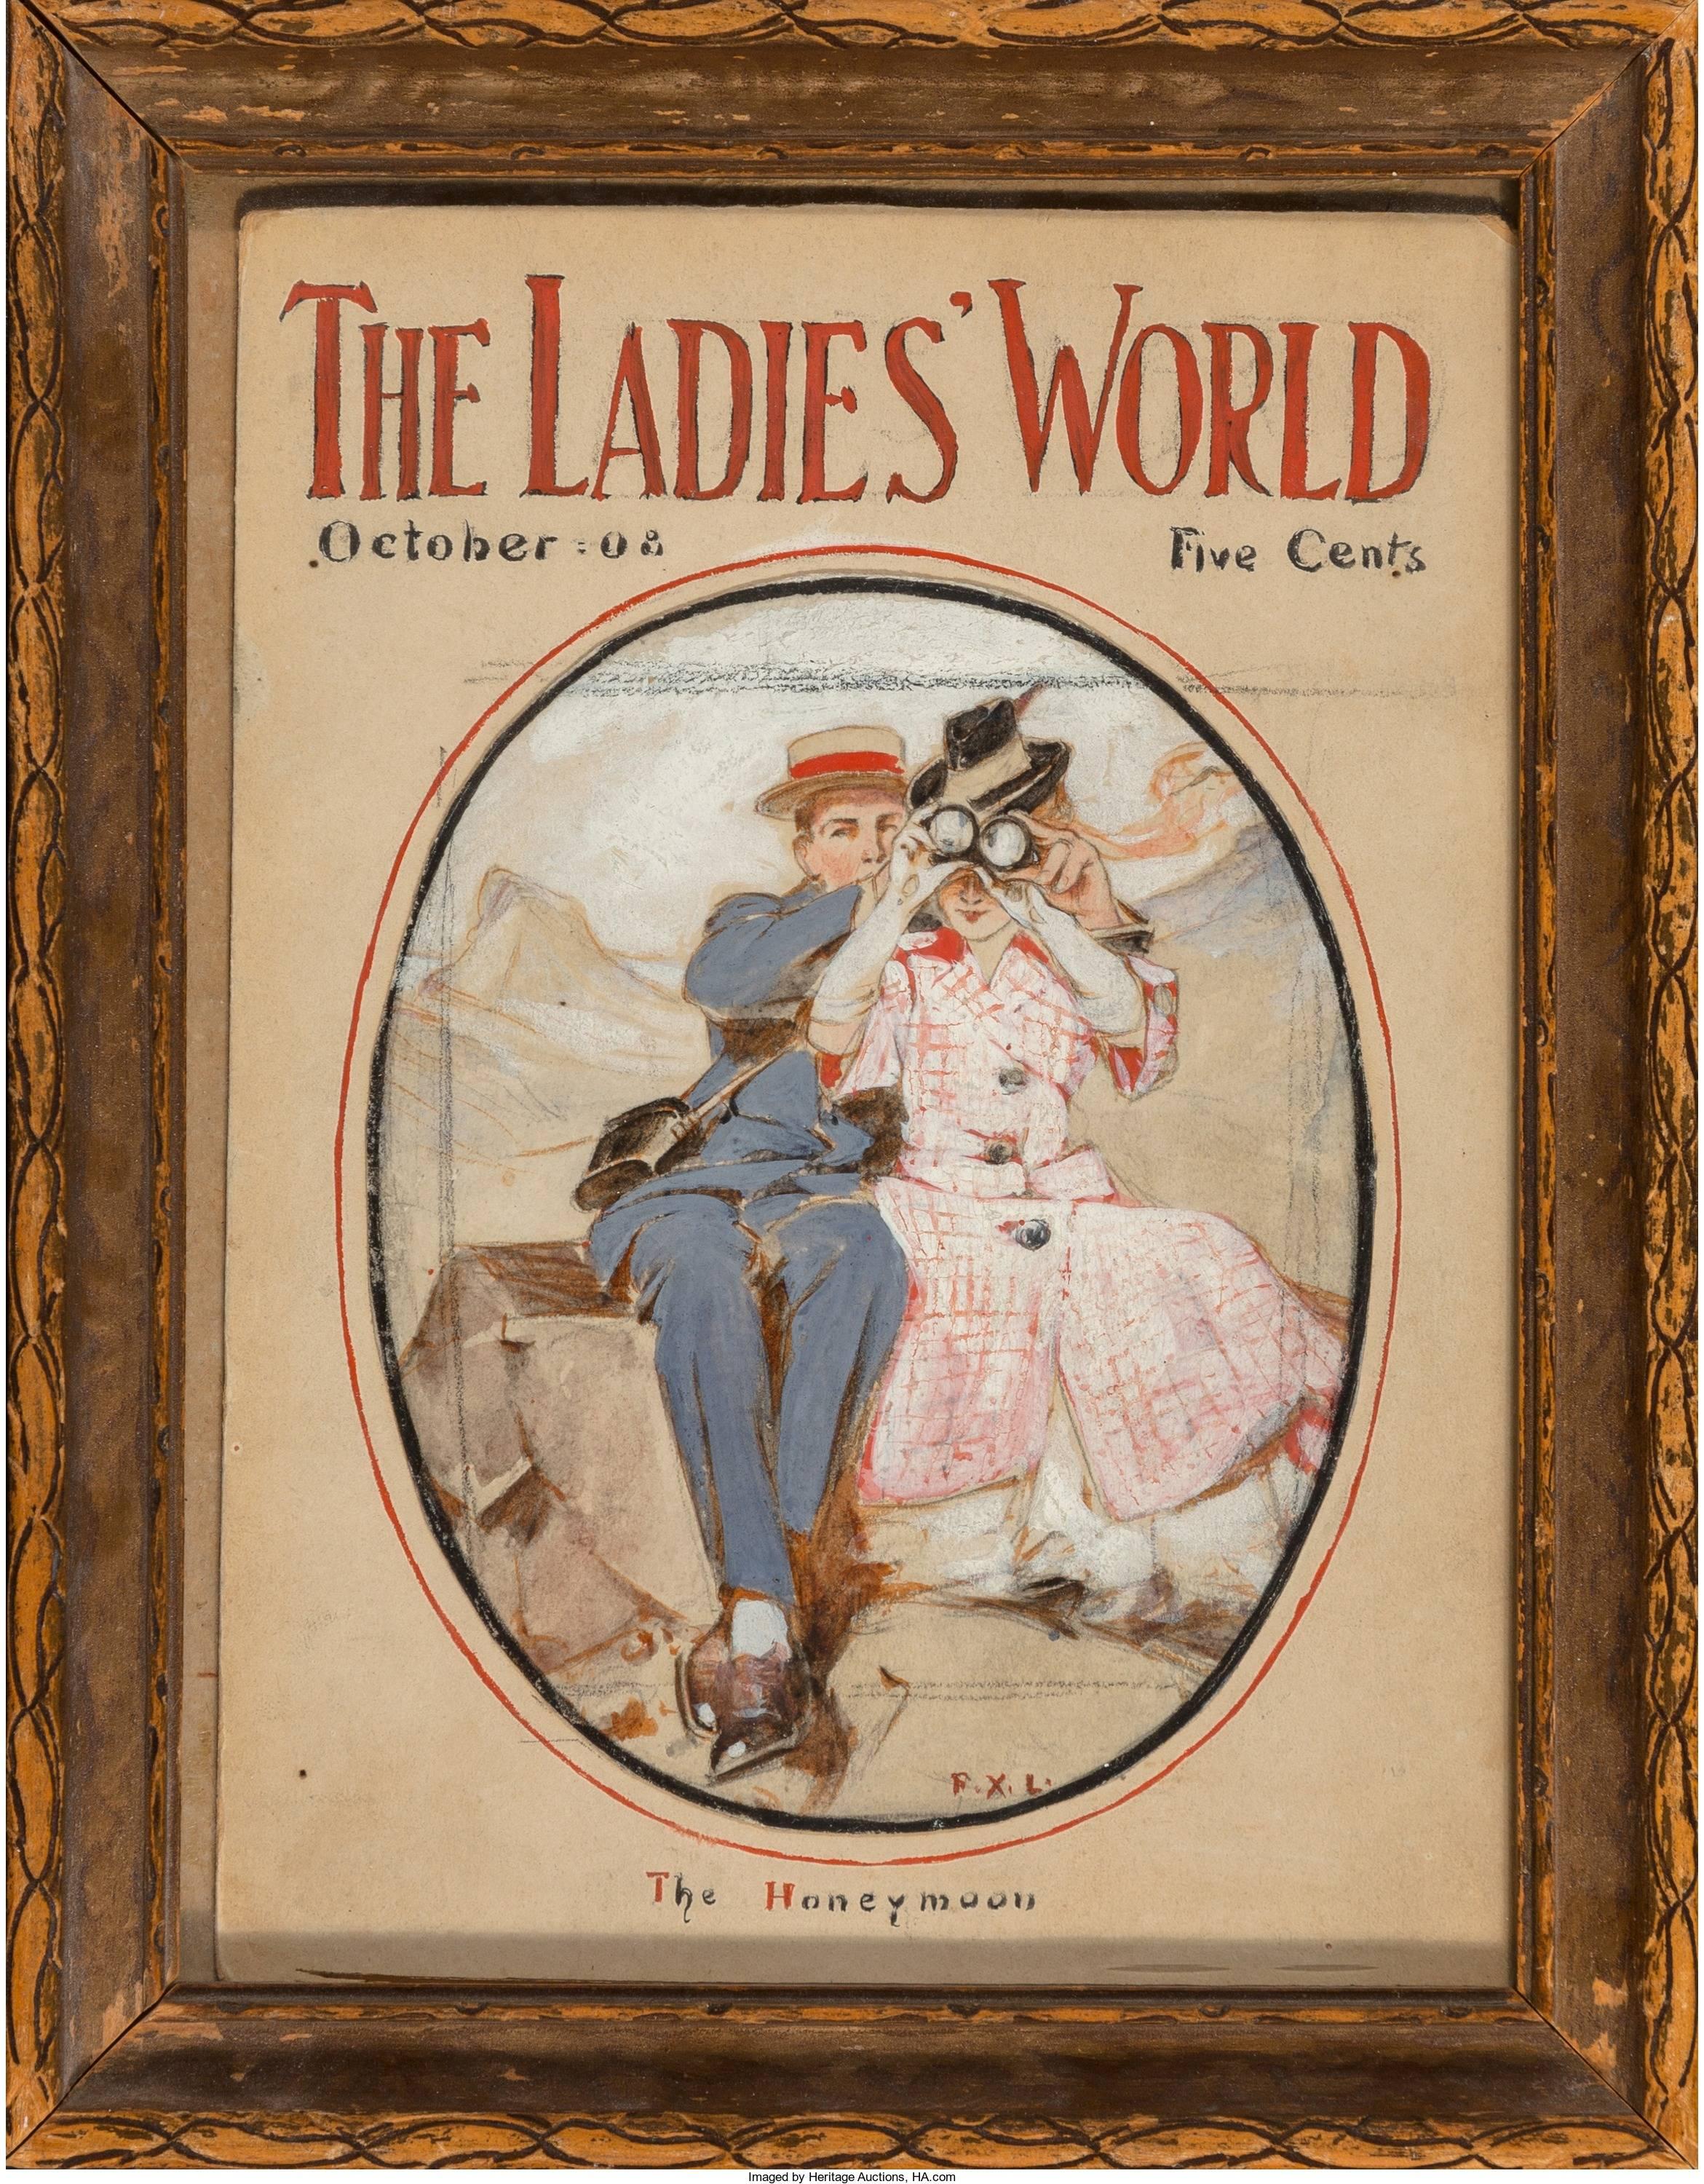 The Honeymoon, The Ladies World Magazine Cover, October 1908 - Painting by Frank Xavier Leyendecker